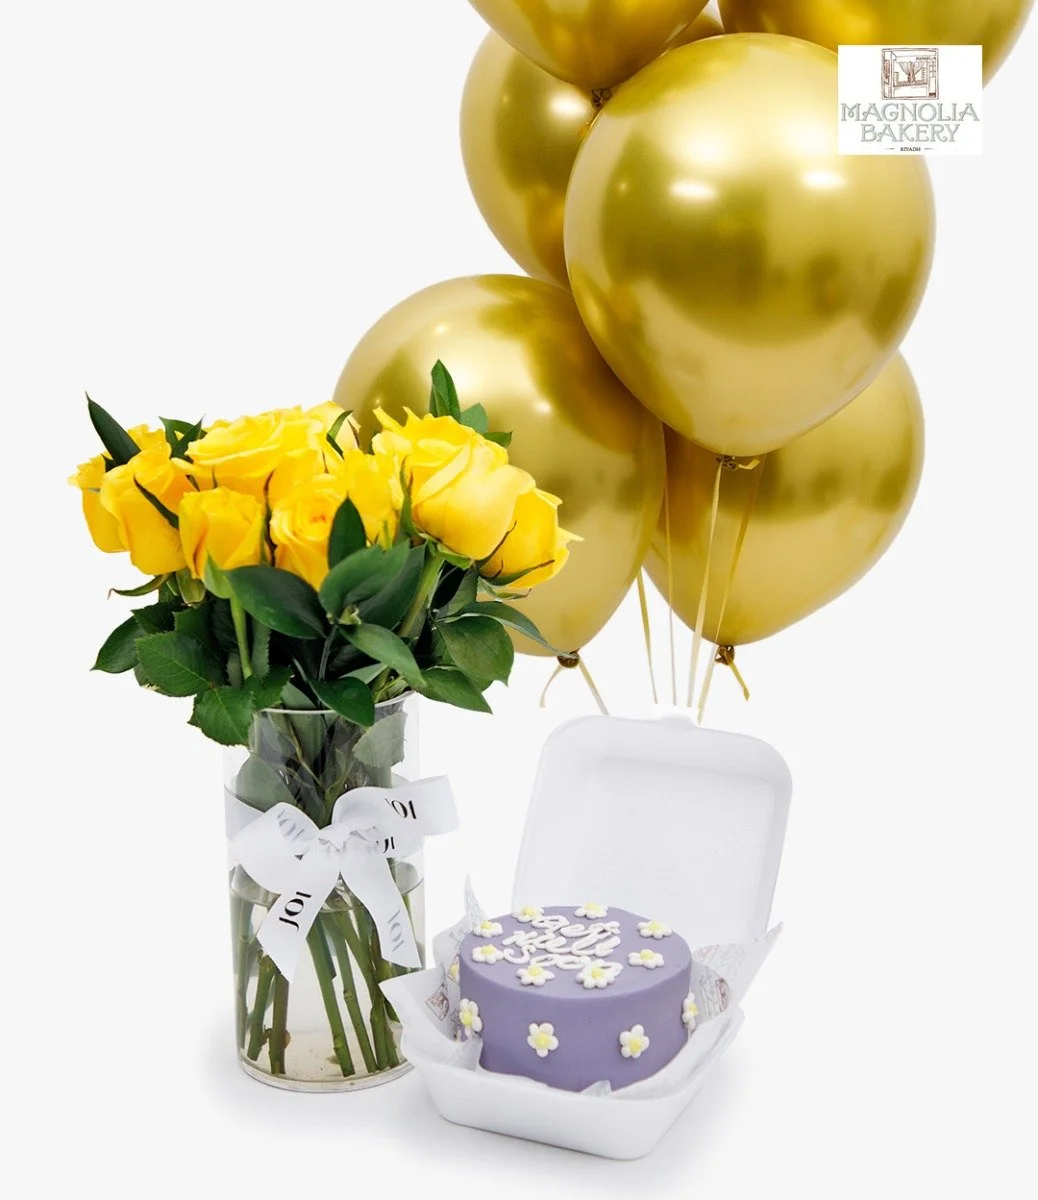 Get Well Soon Lunch Box Cake, Yellow Roses Flowers And Balloons Bundle